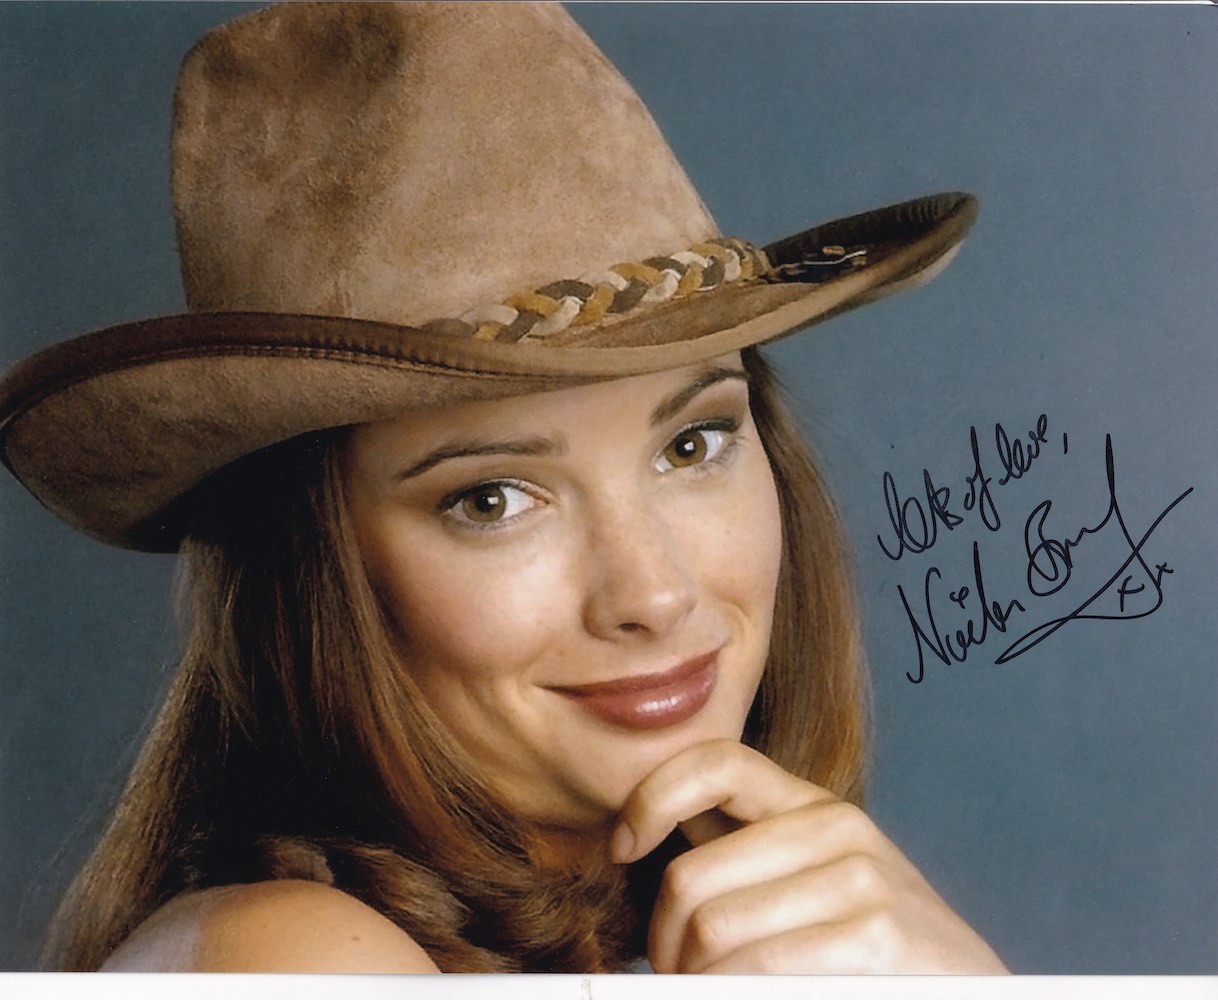 Nicola Bryant Popular Actress, Dr Who 10x8 inch Signed Photo. Good Condition. All autographs come